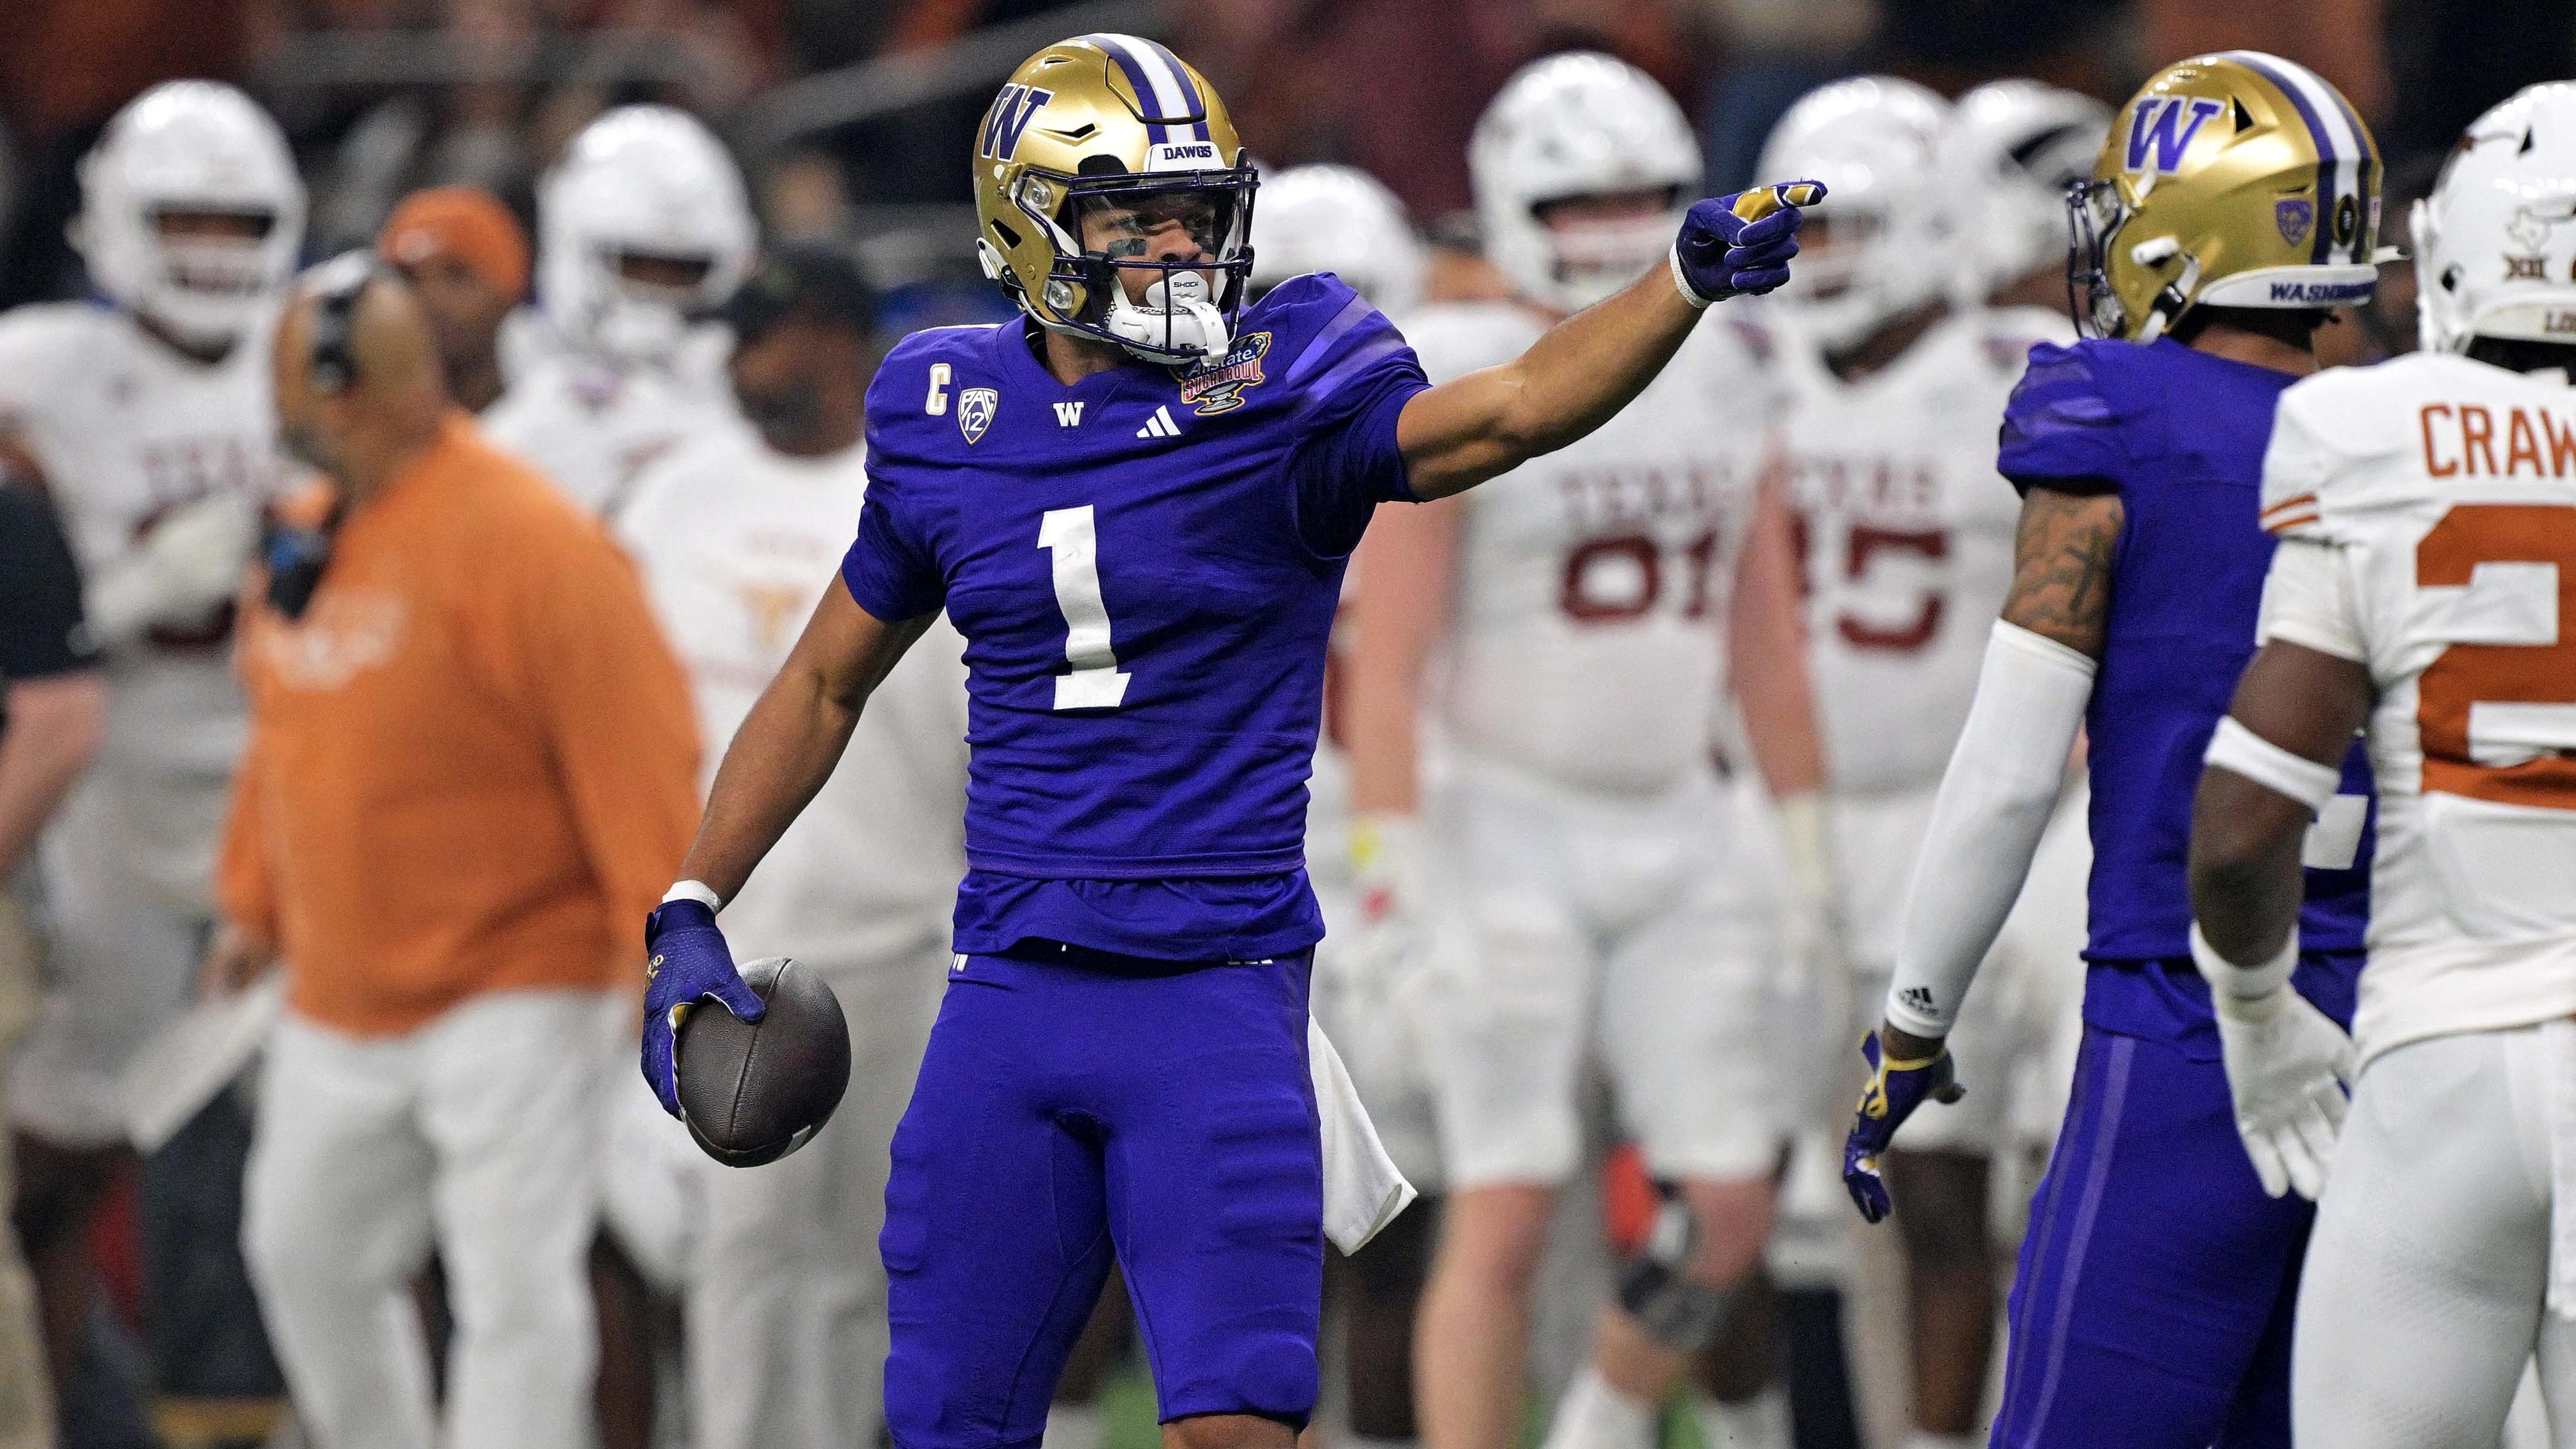 Washington Huskies wide receiver Rome Odunze (1) celebrates after a play during the second quarter against the Texas Longhorns in the 2024 Sugar Bowl college football playoff semifinal game at Caesars Superdome / Matthew Hinton - USA TODAY Sports